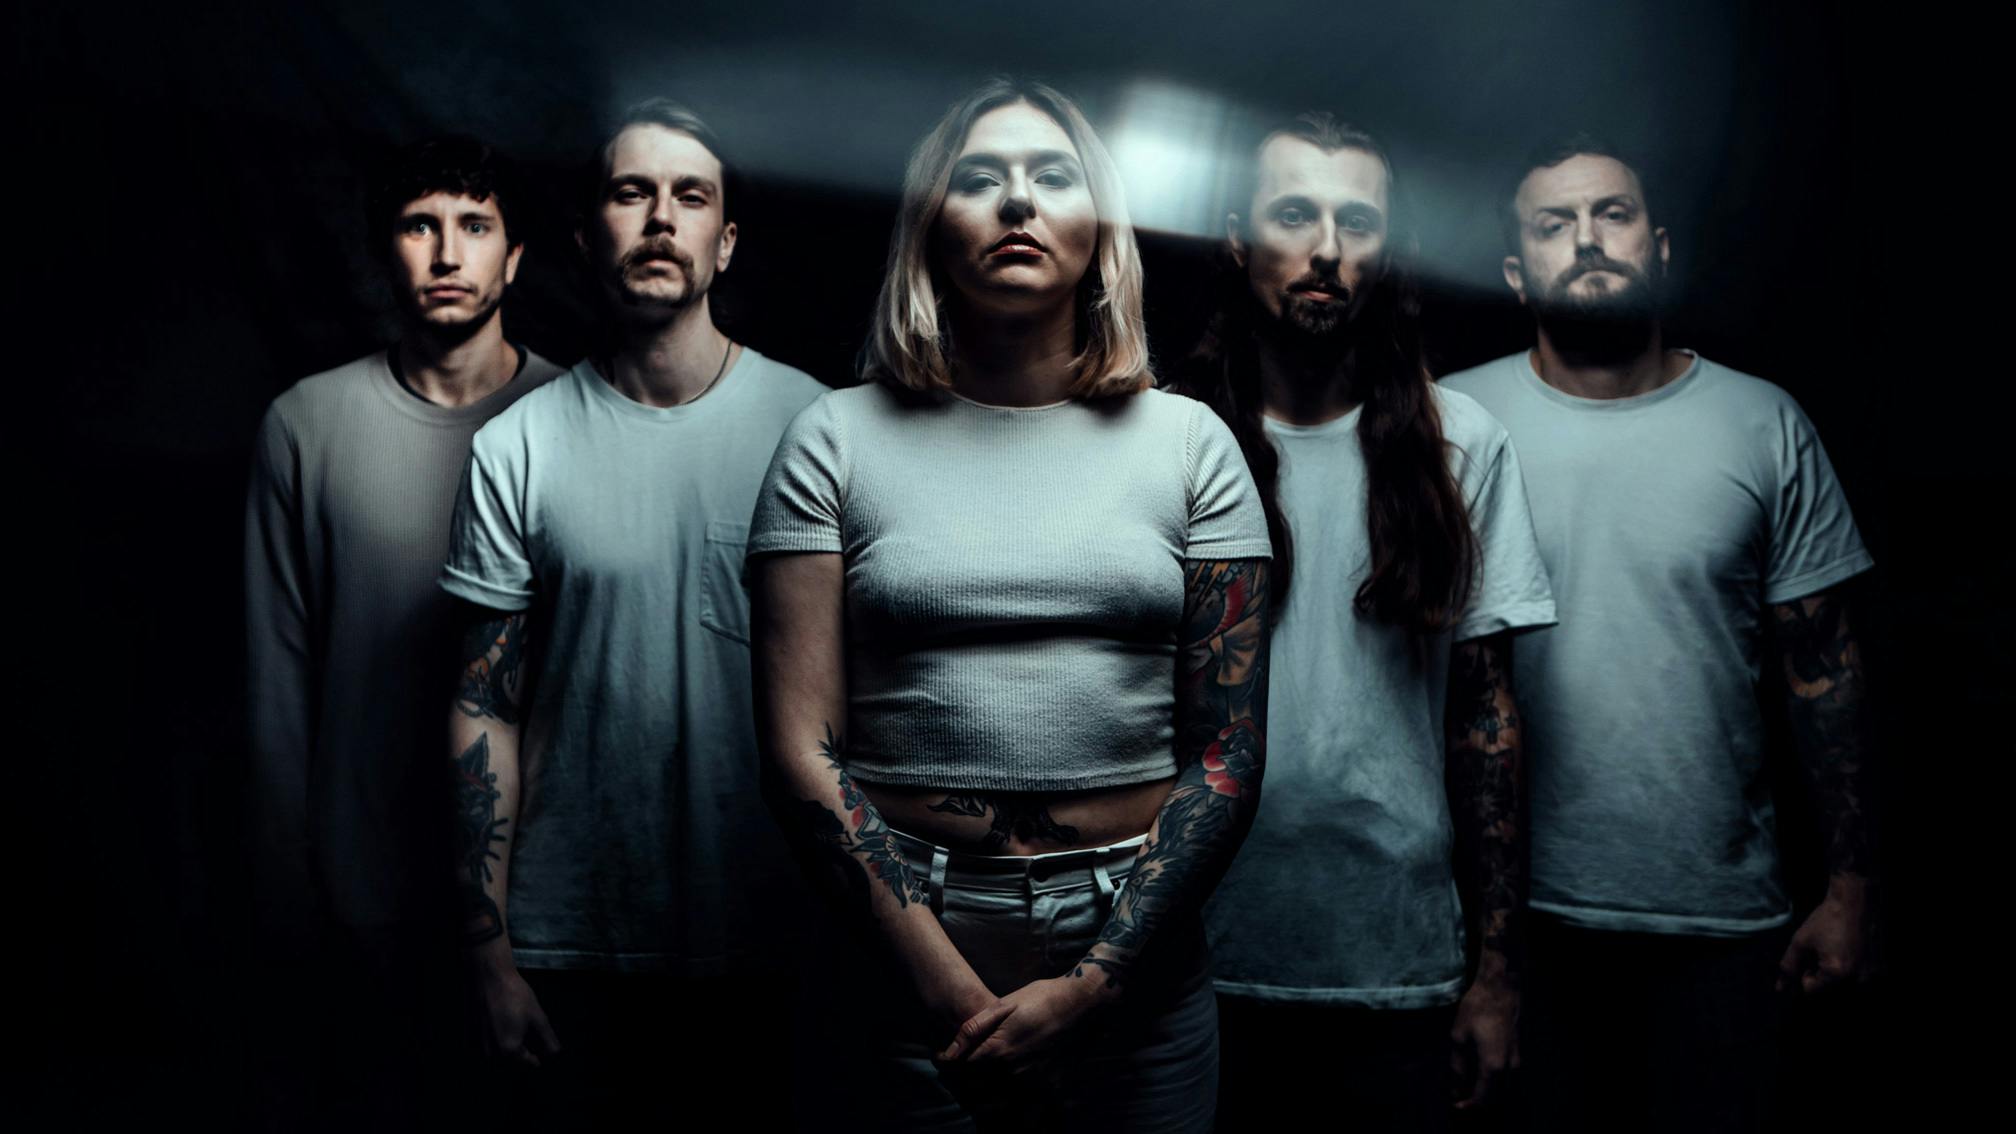 Venom Prison sign to Century Media, confirm they are writing a new album